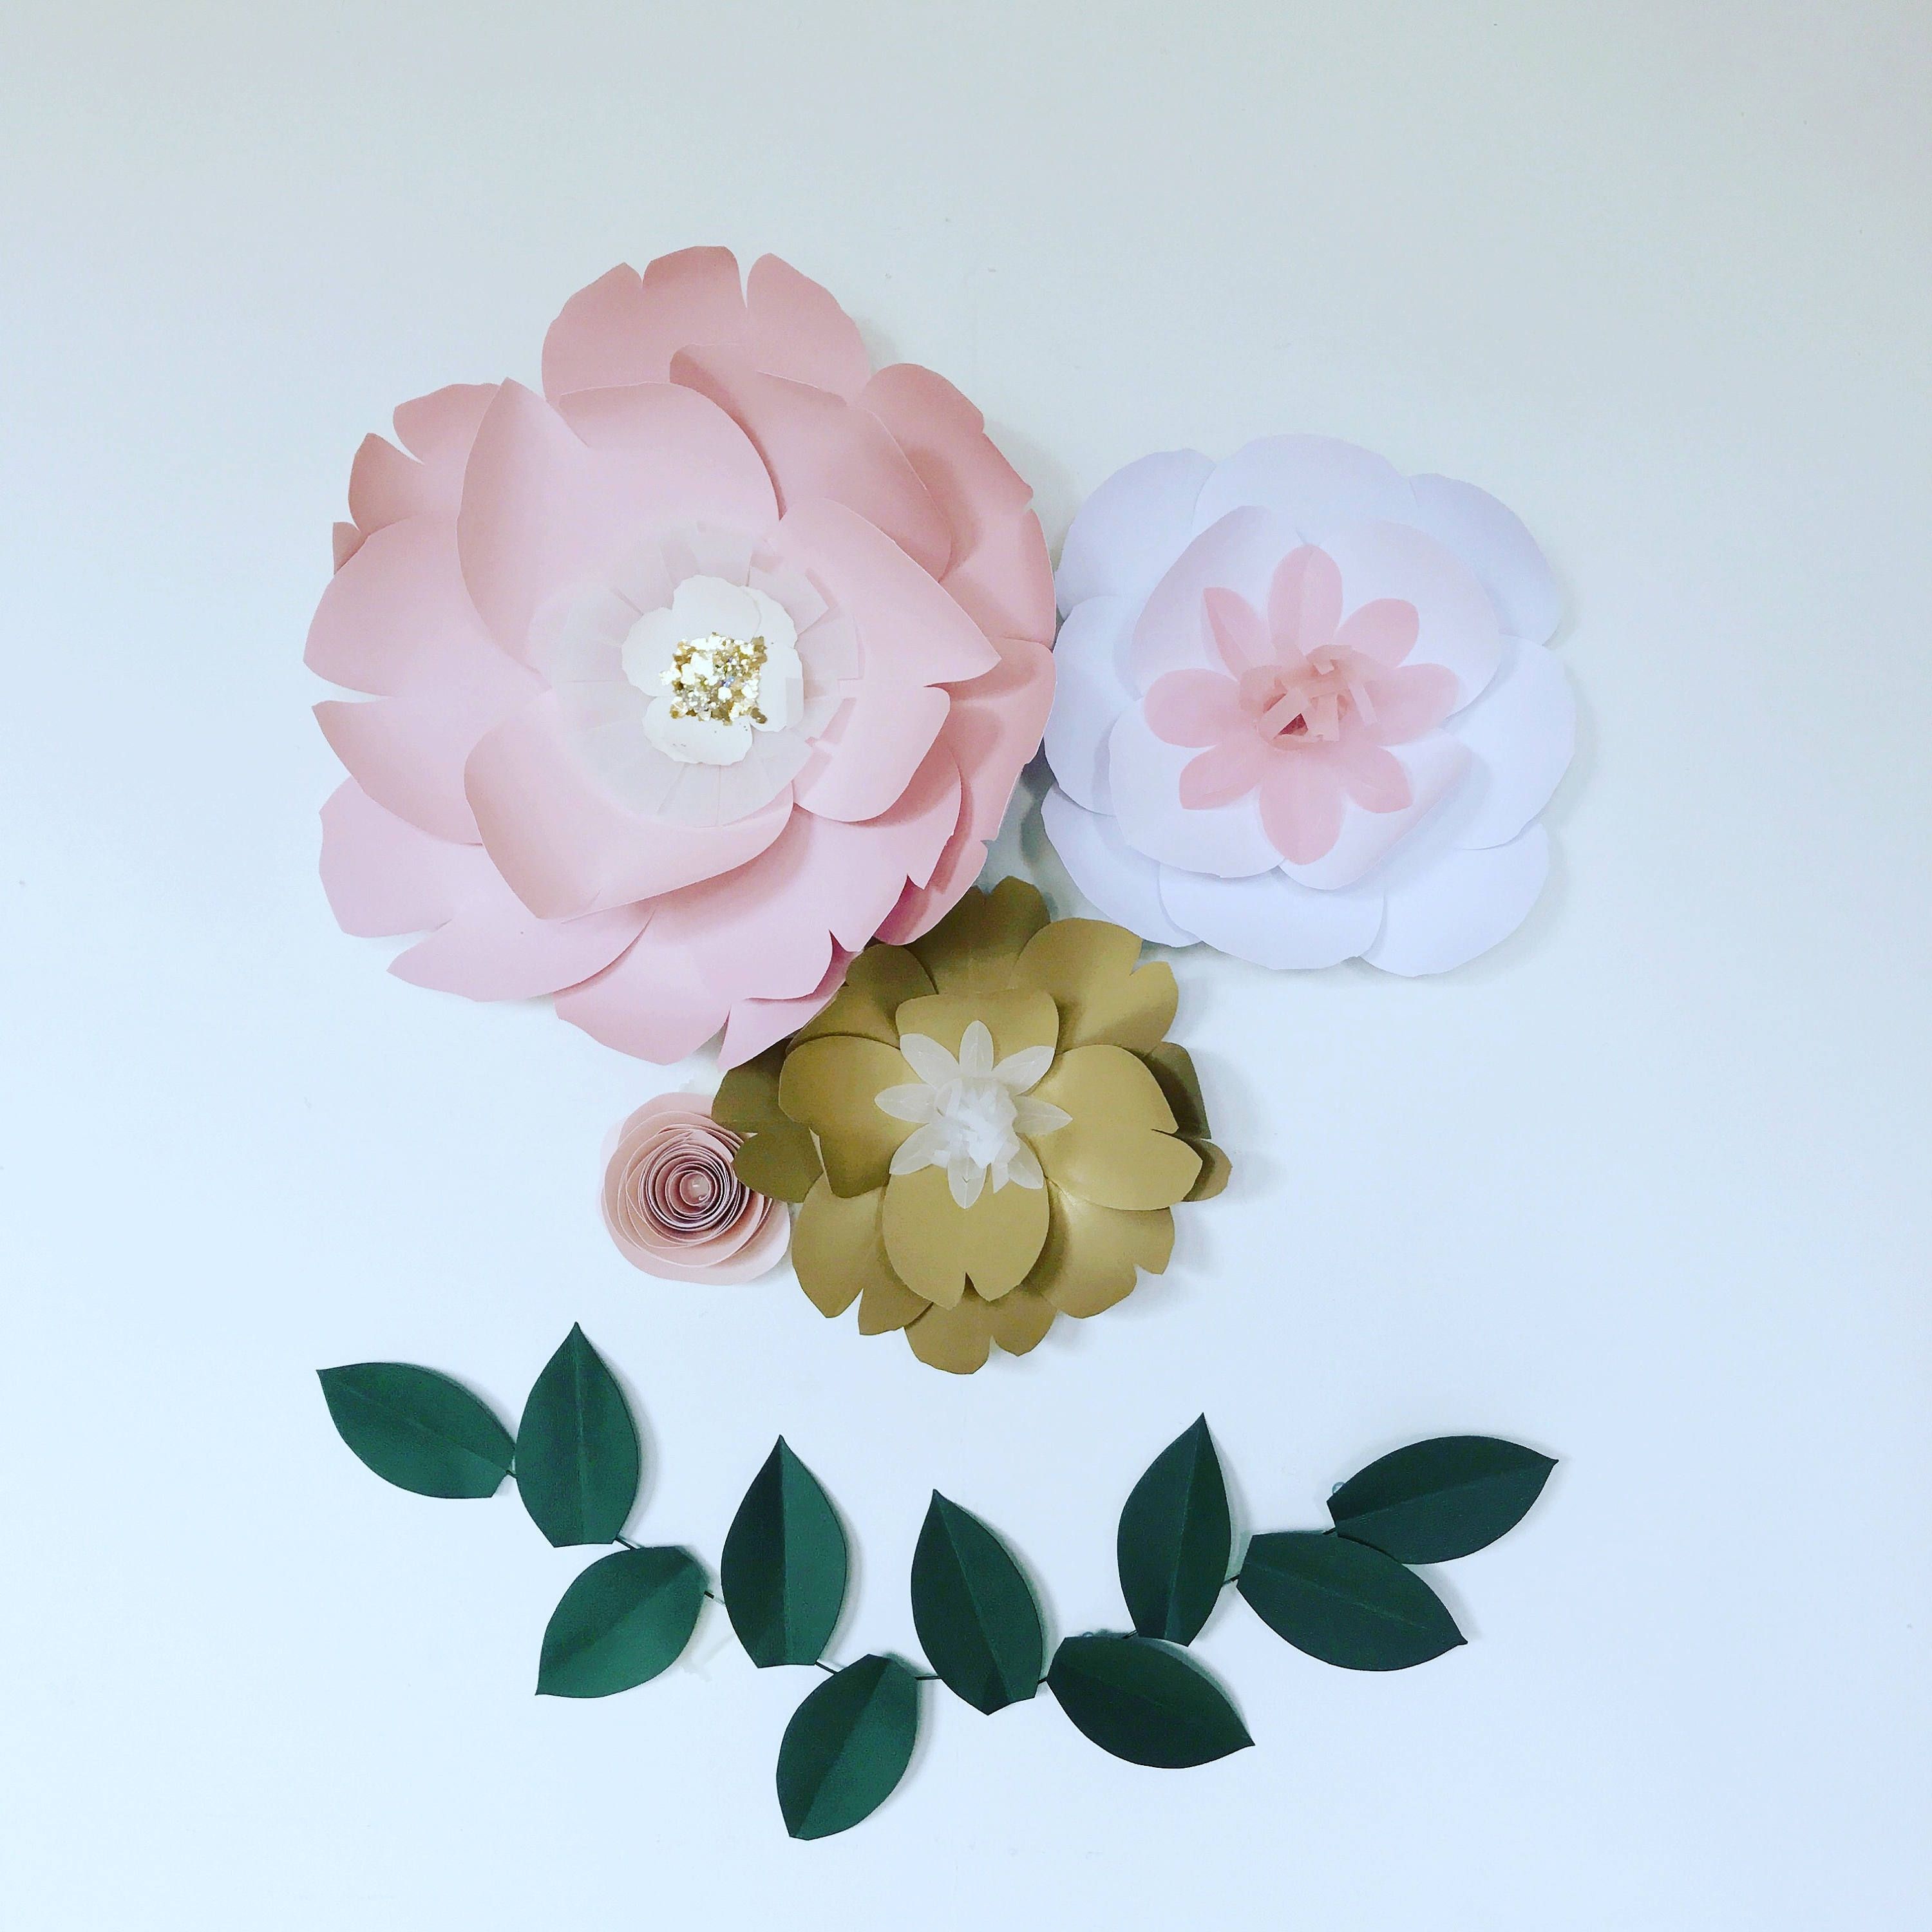 Large Paper Flowers Wall Decor, Floral Wall Art, Giant Pink / Gold Inside Flower Wall Art (View 11 of 20)